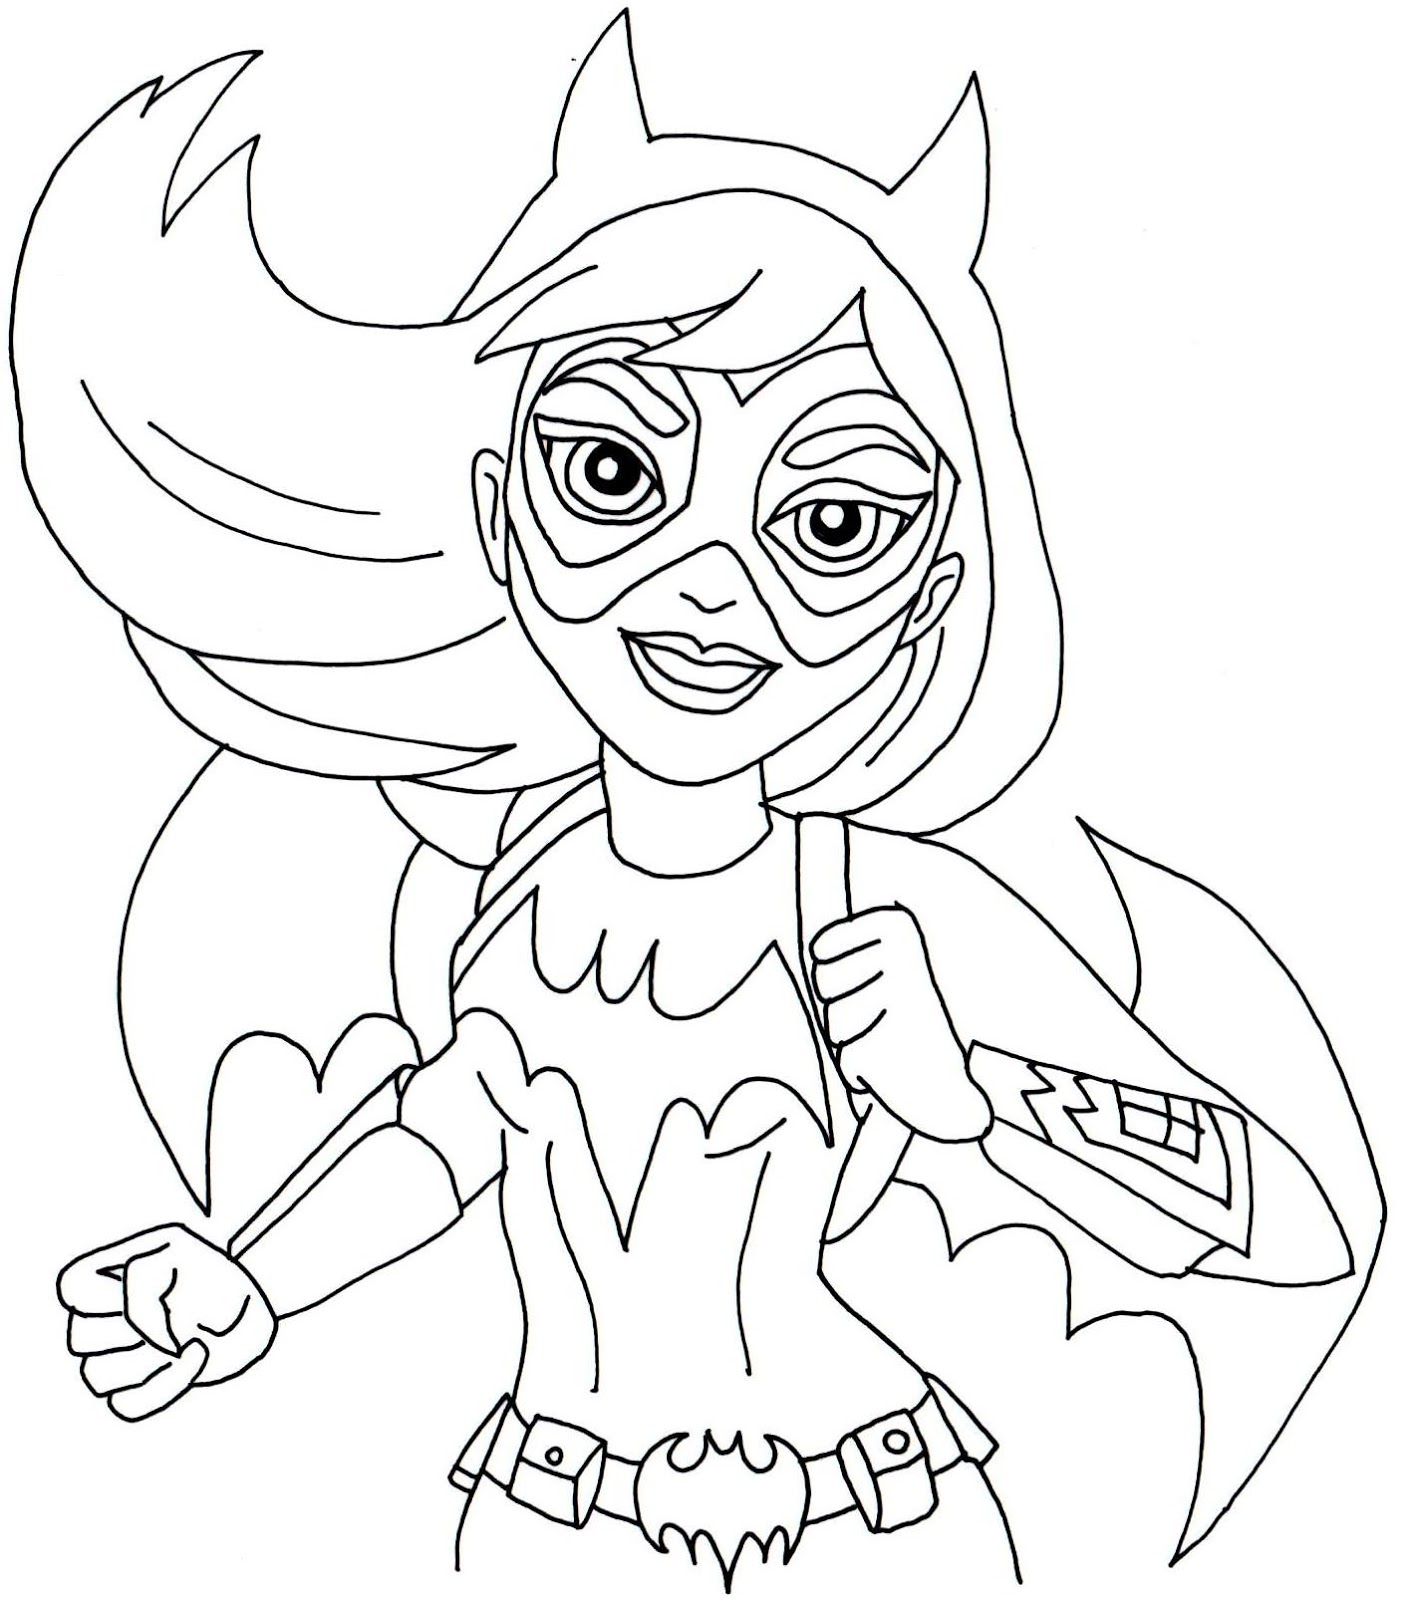 superhero-coloring-pages-free-printable